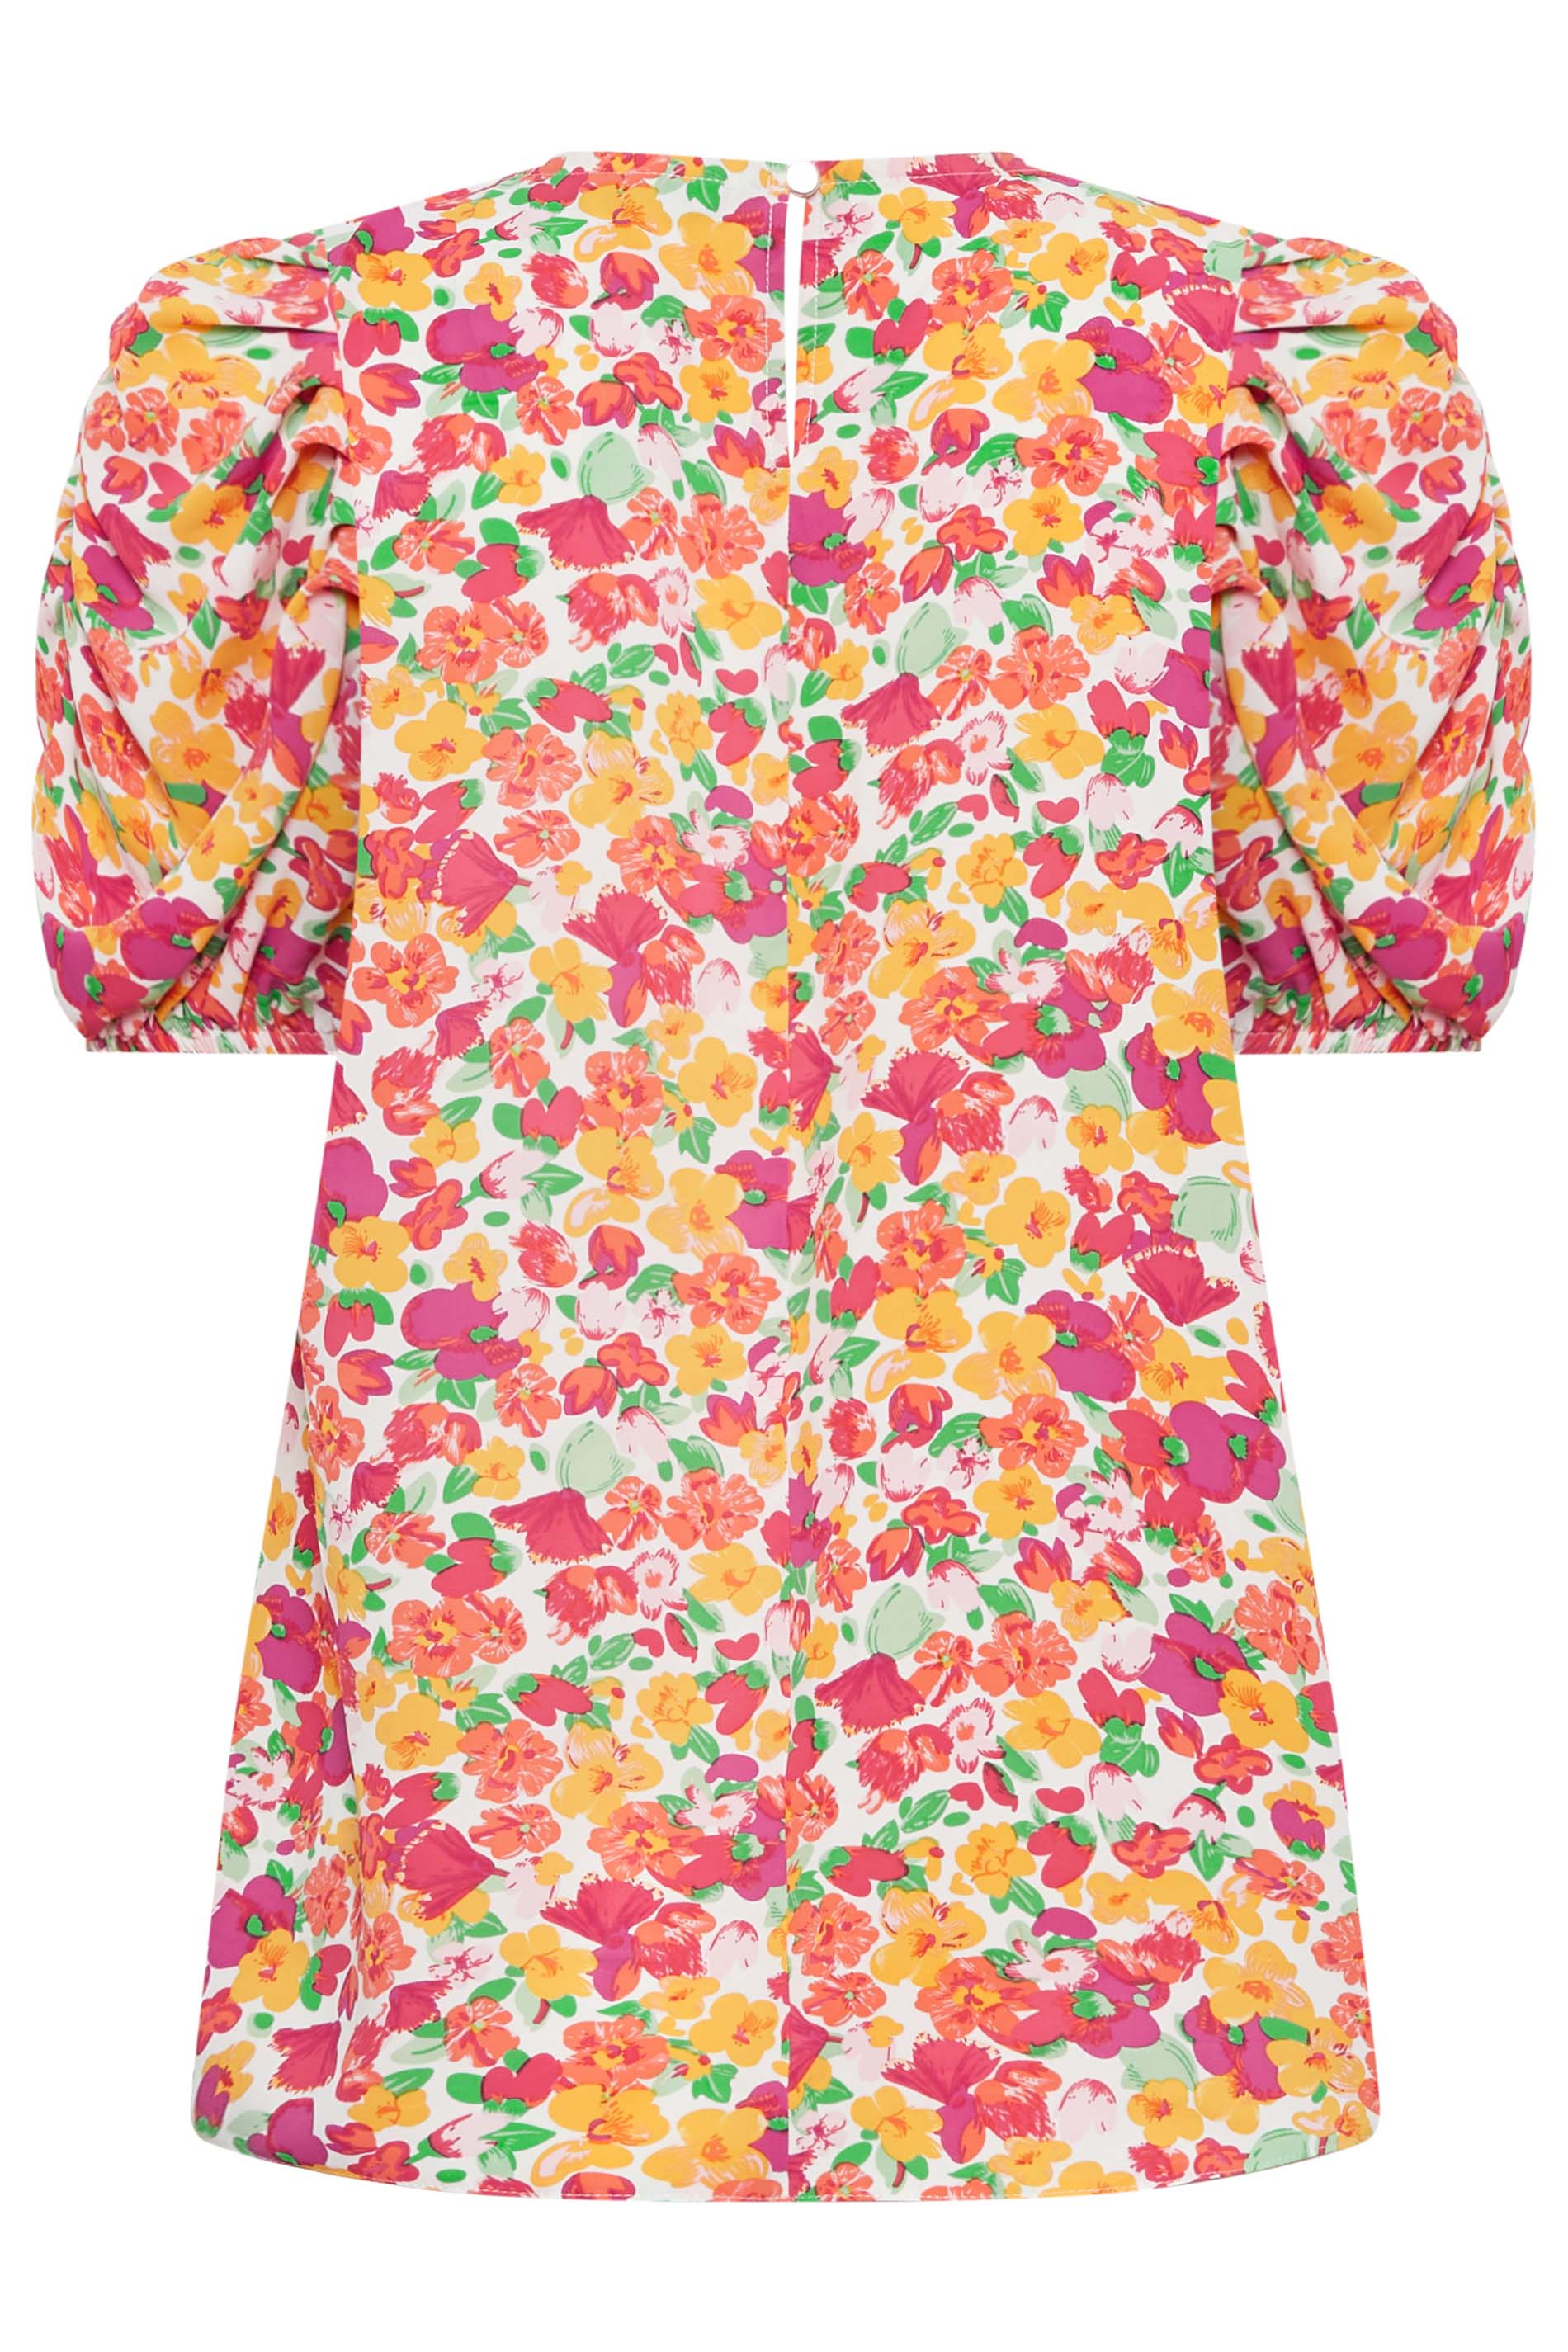 M&Co White & Pink Floral Print Puff Sleeve Blouse | M&Co